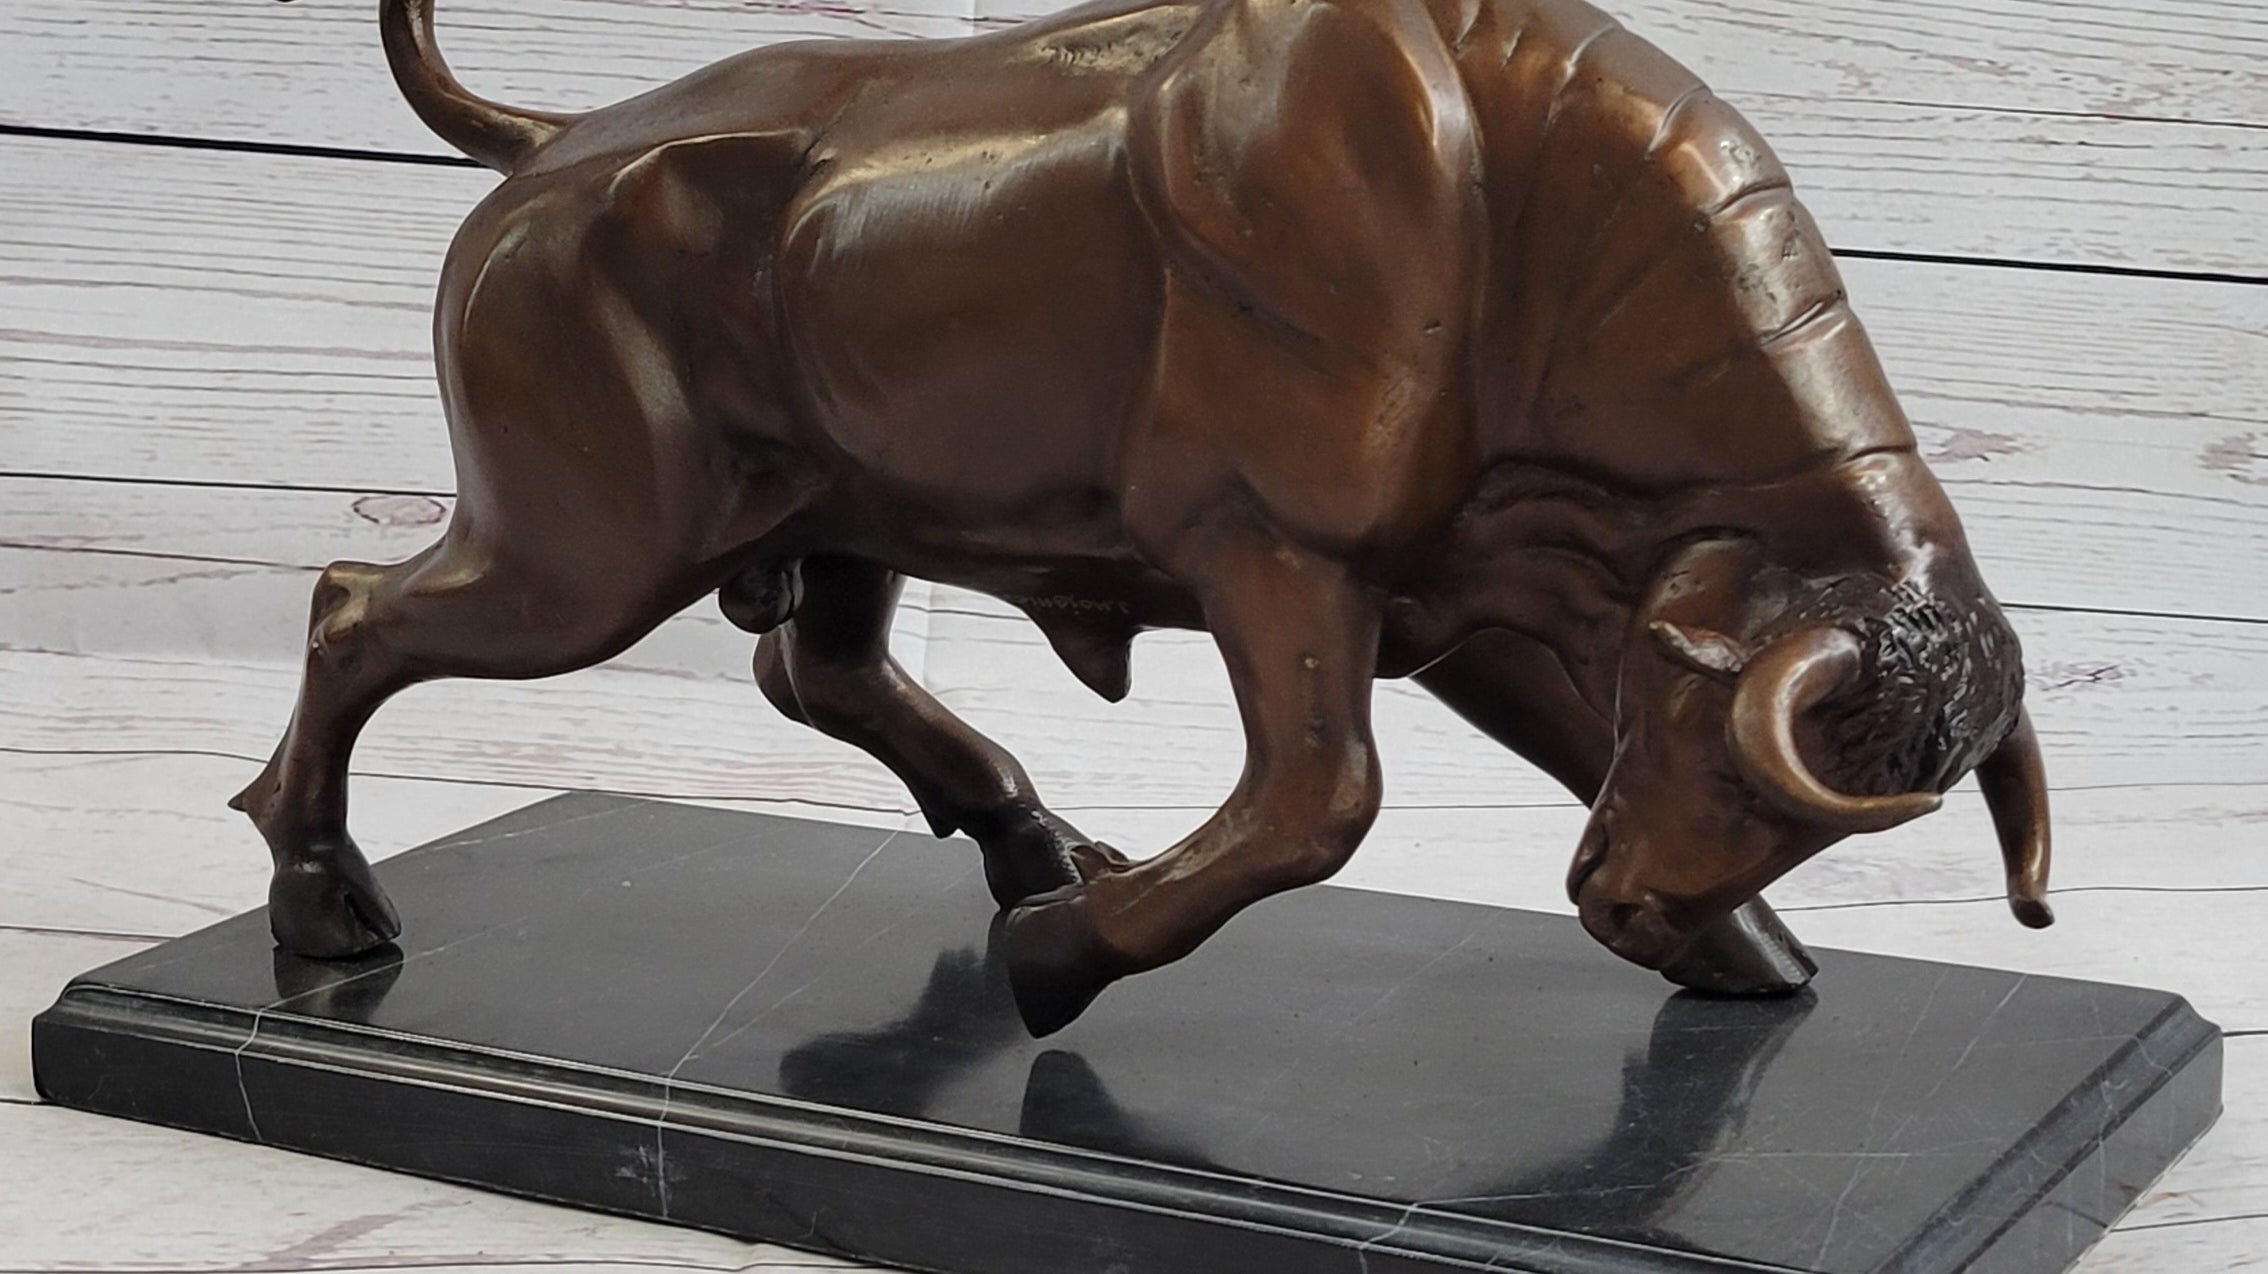 Charging into History - The Iconic Bull in Bronze